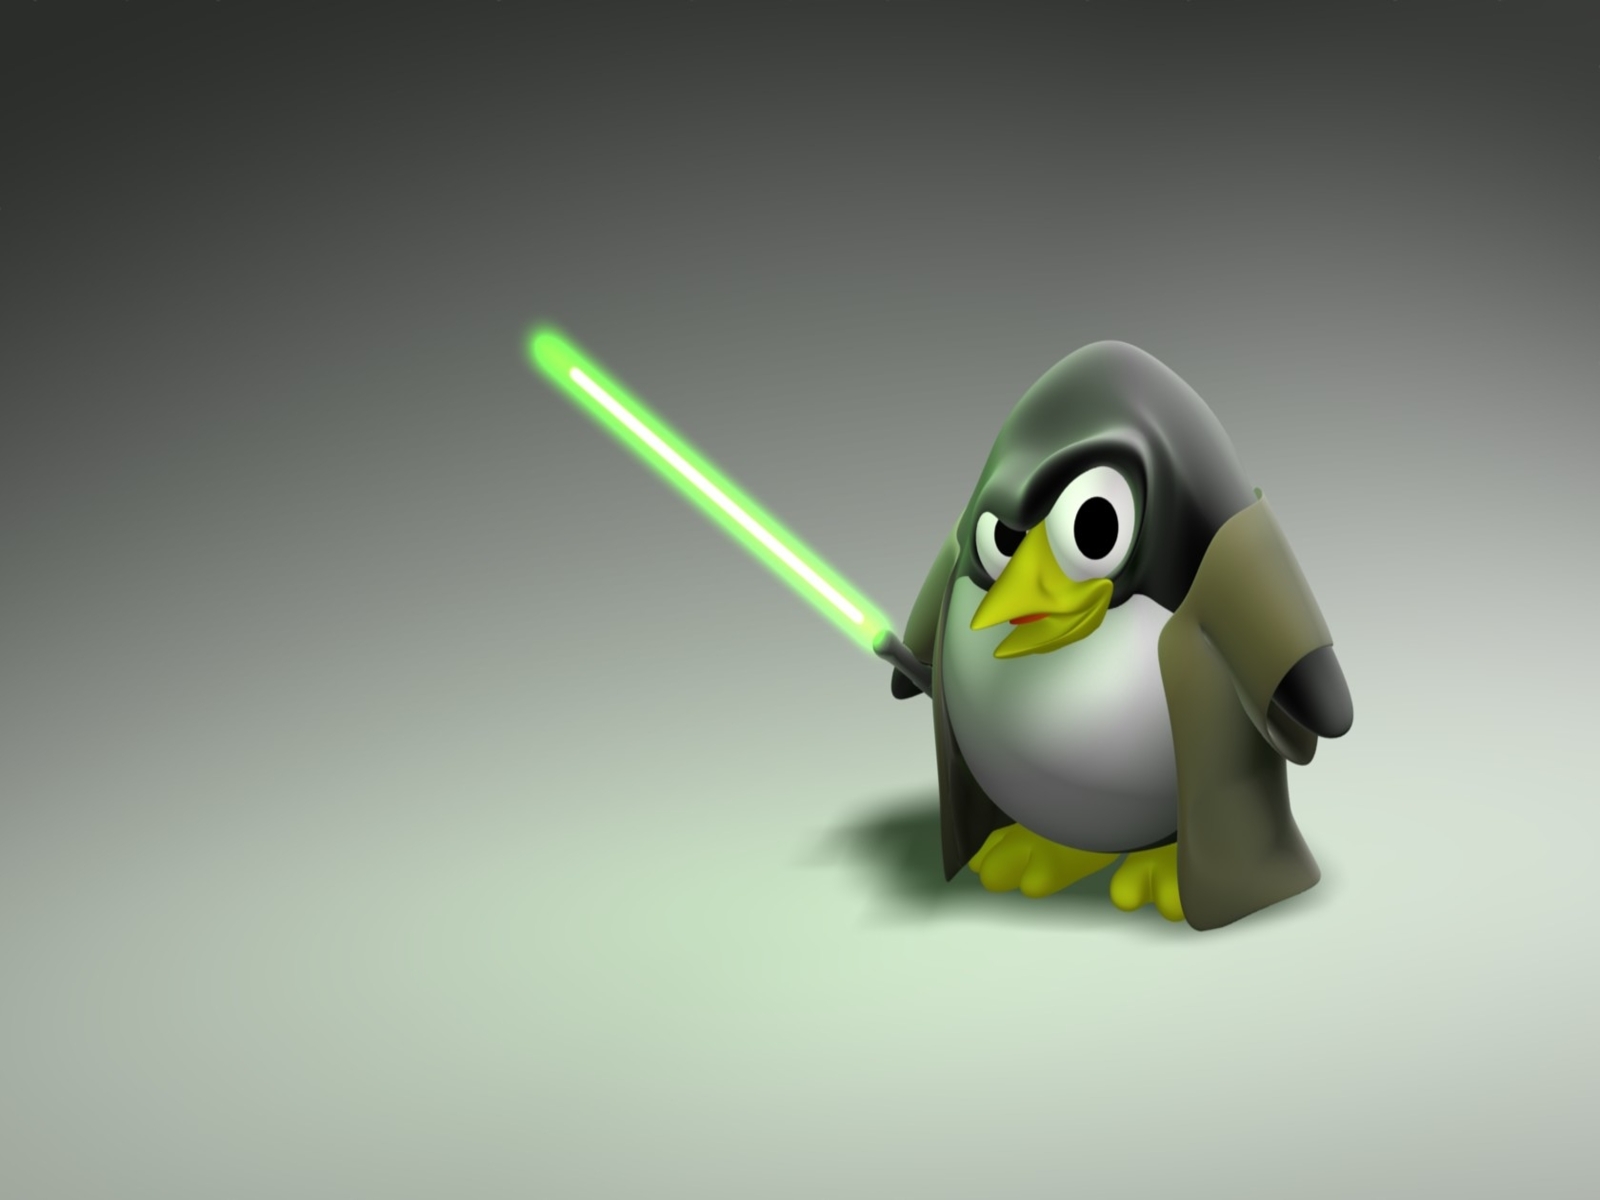 Linux Background - Linux Backgrounds and Wallpapers